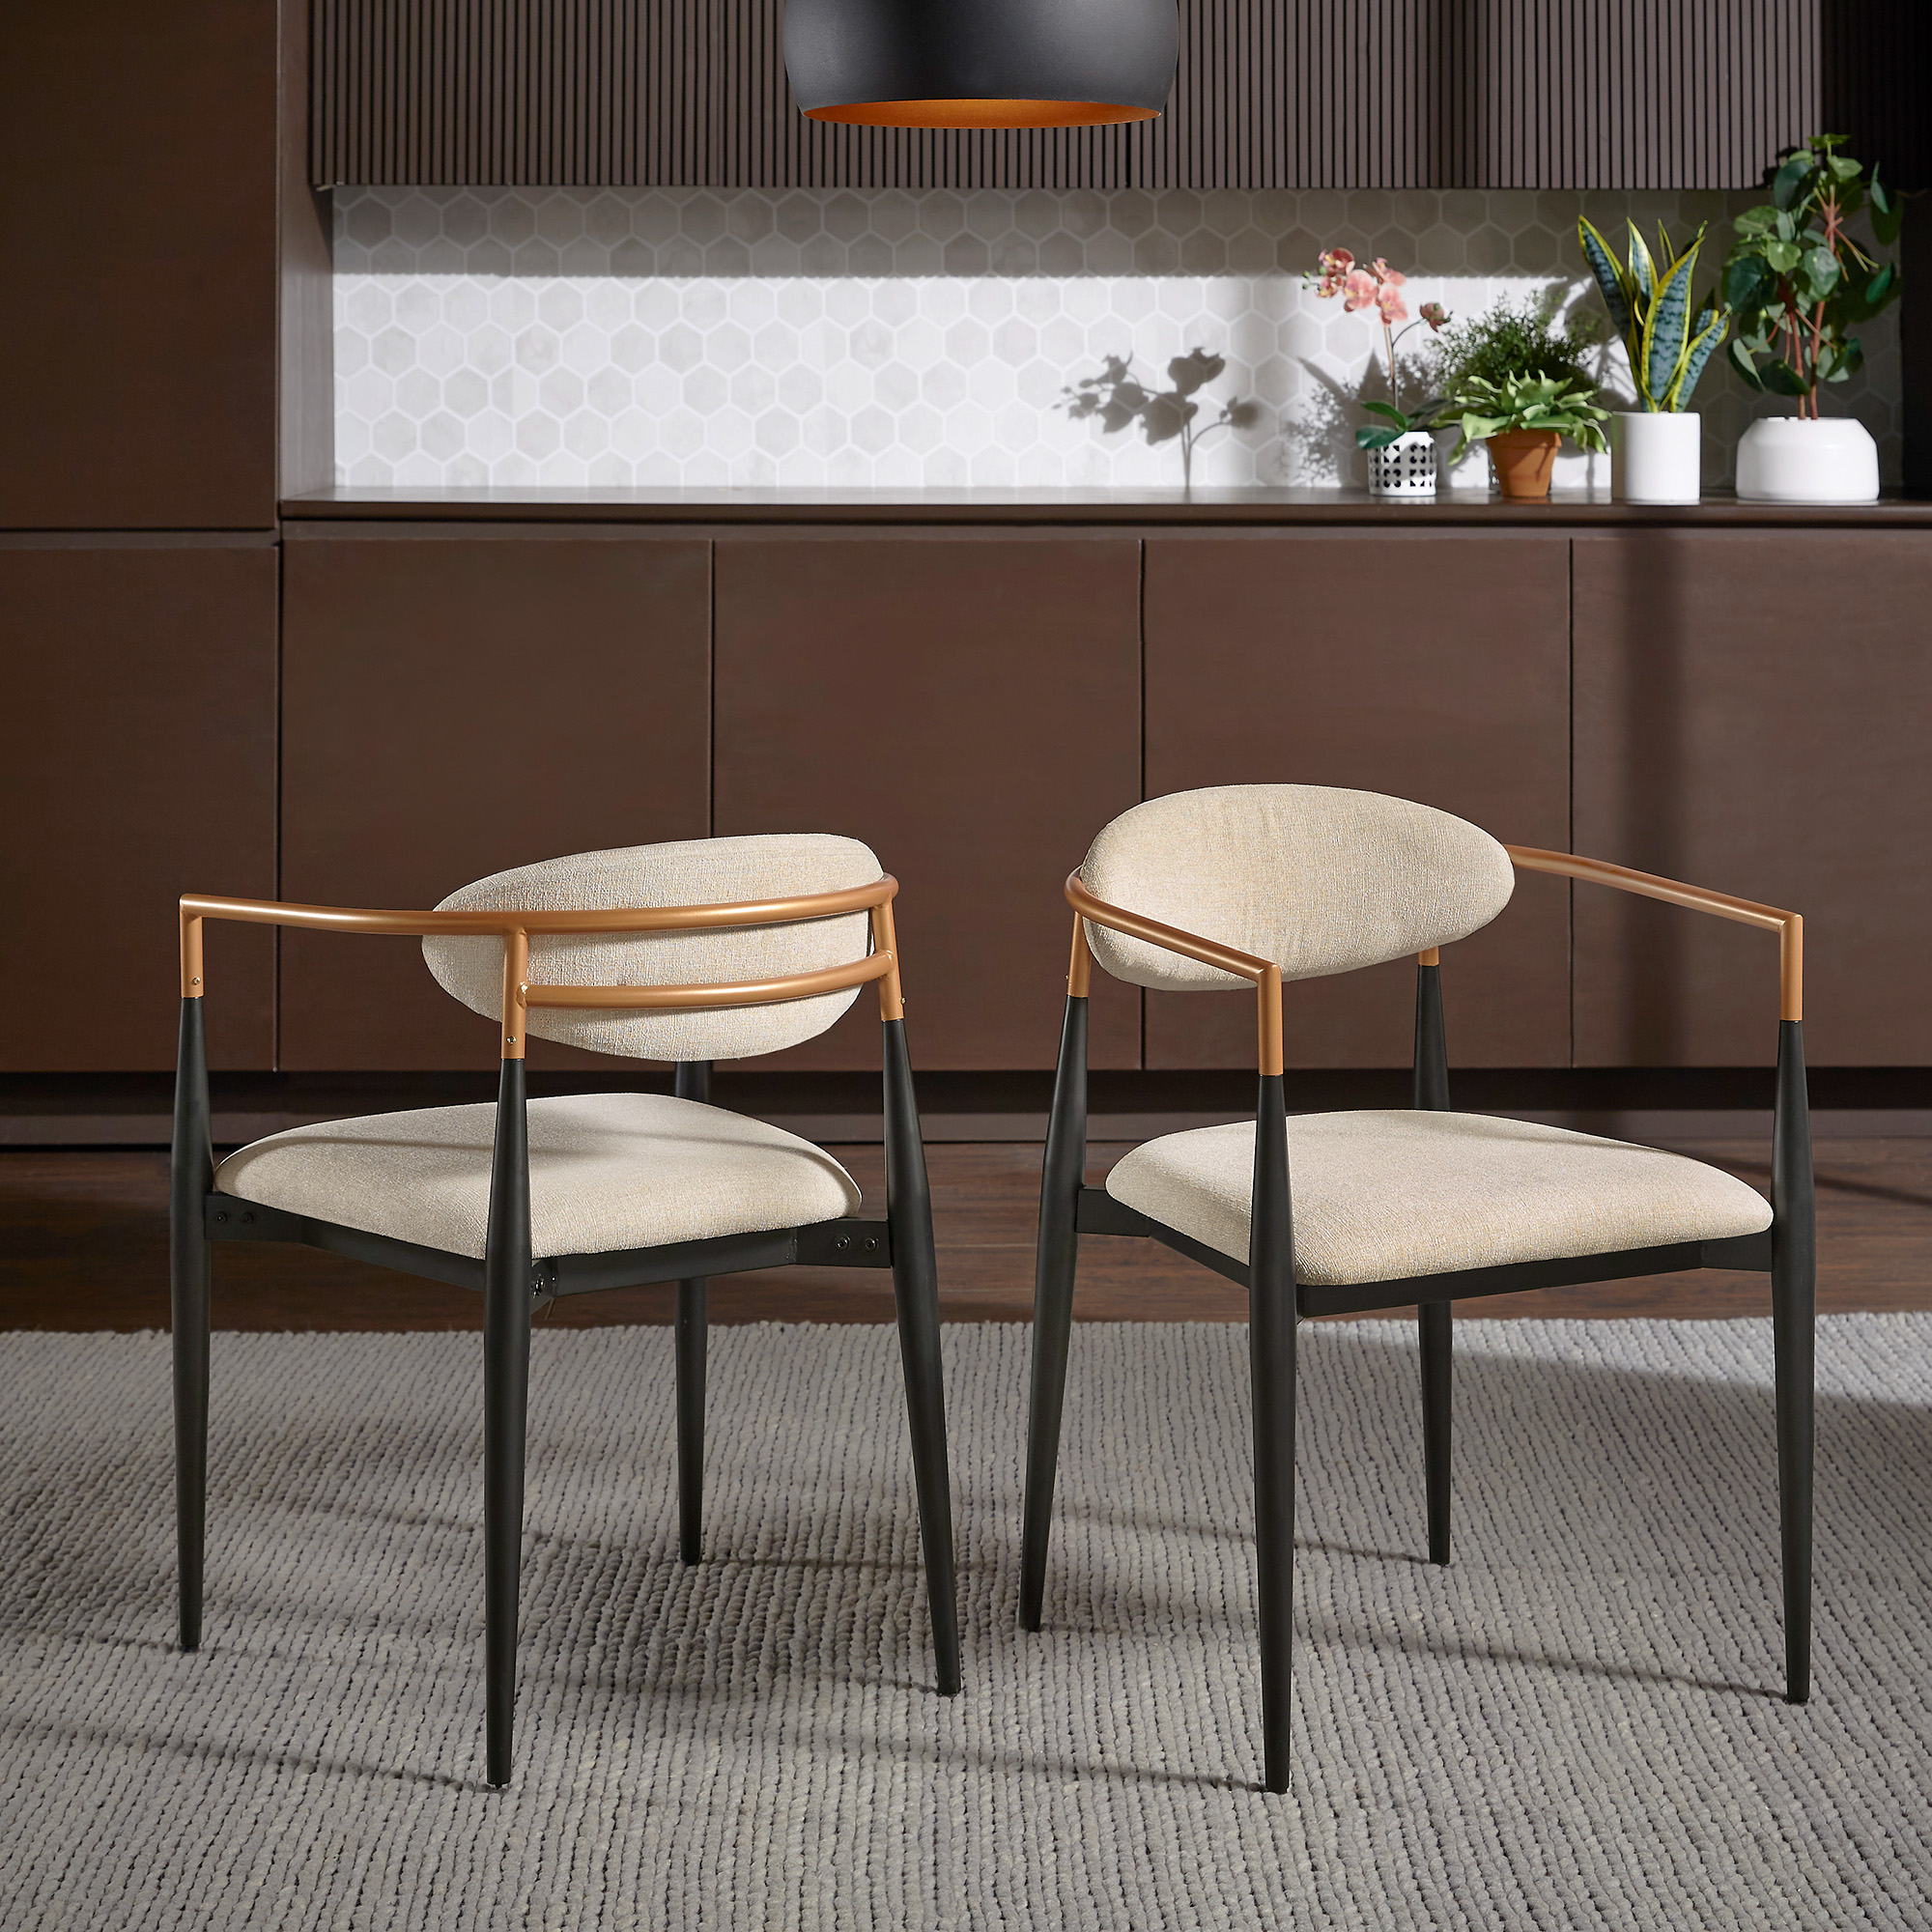 Mid-century Modern Dining Chair with Two-tone Copper & Black Finish (Set of 2)